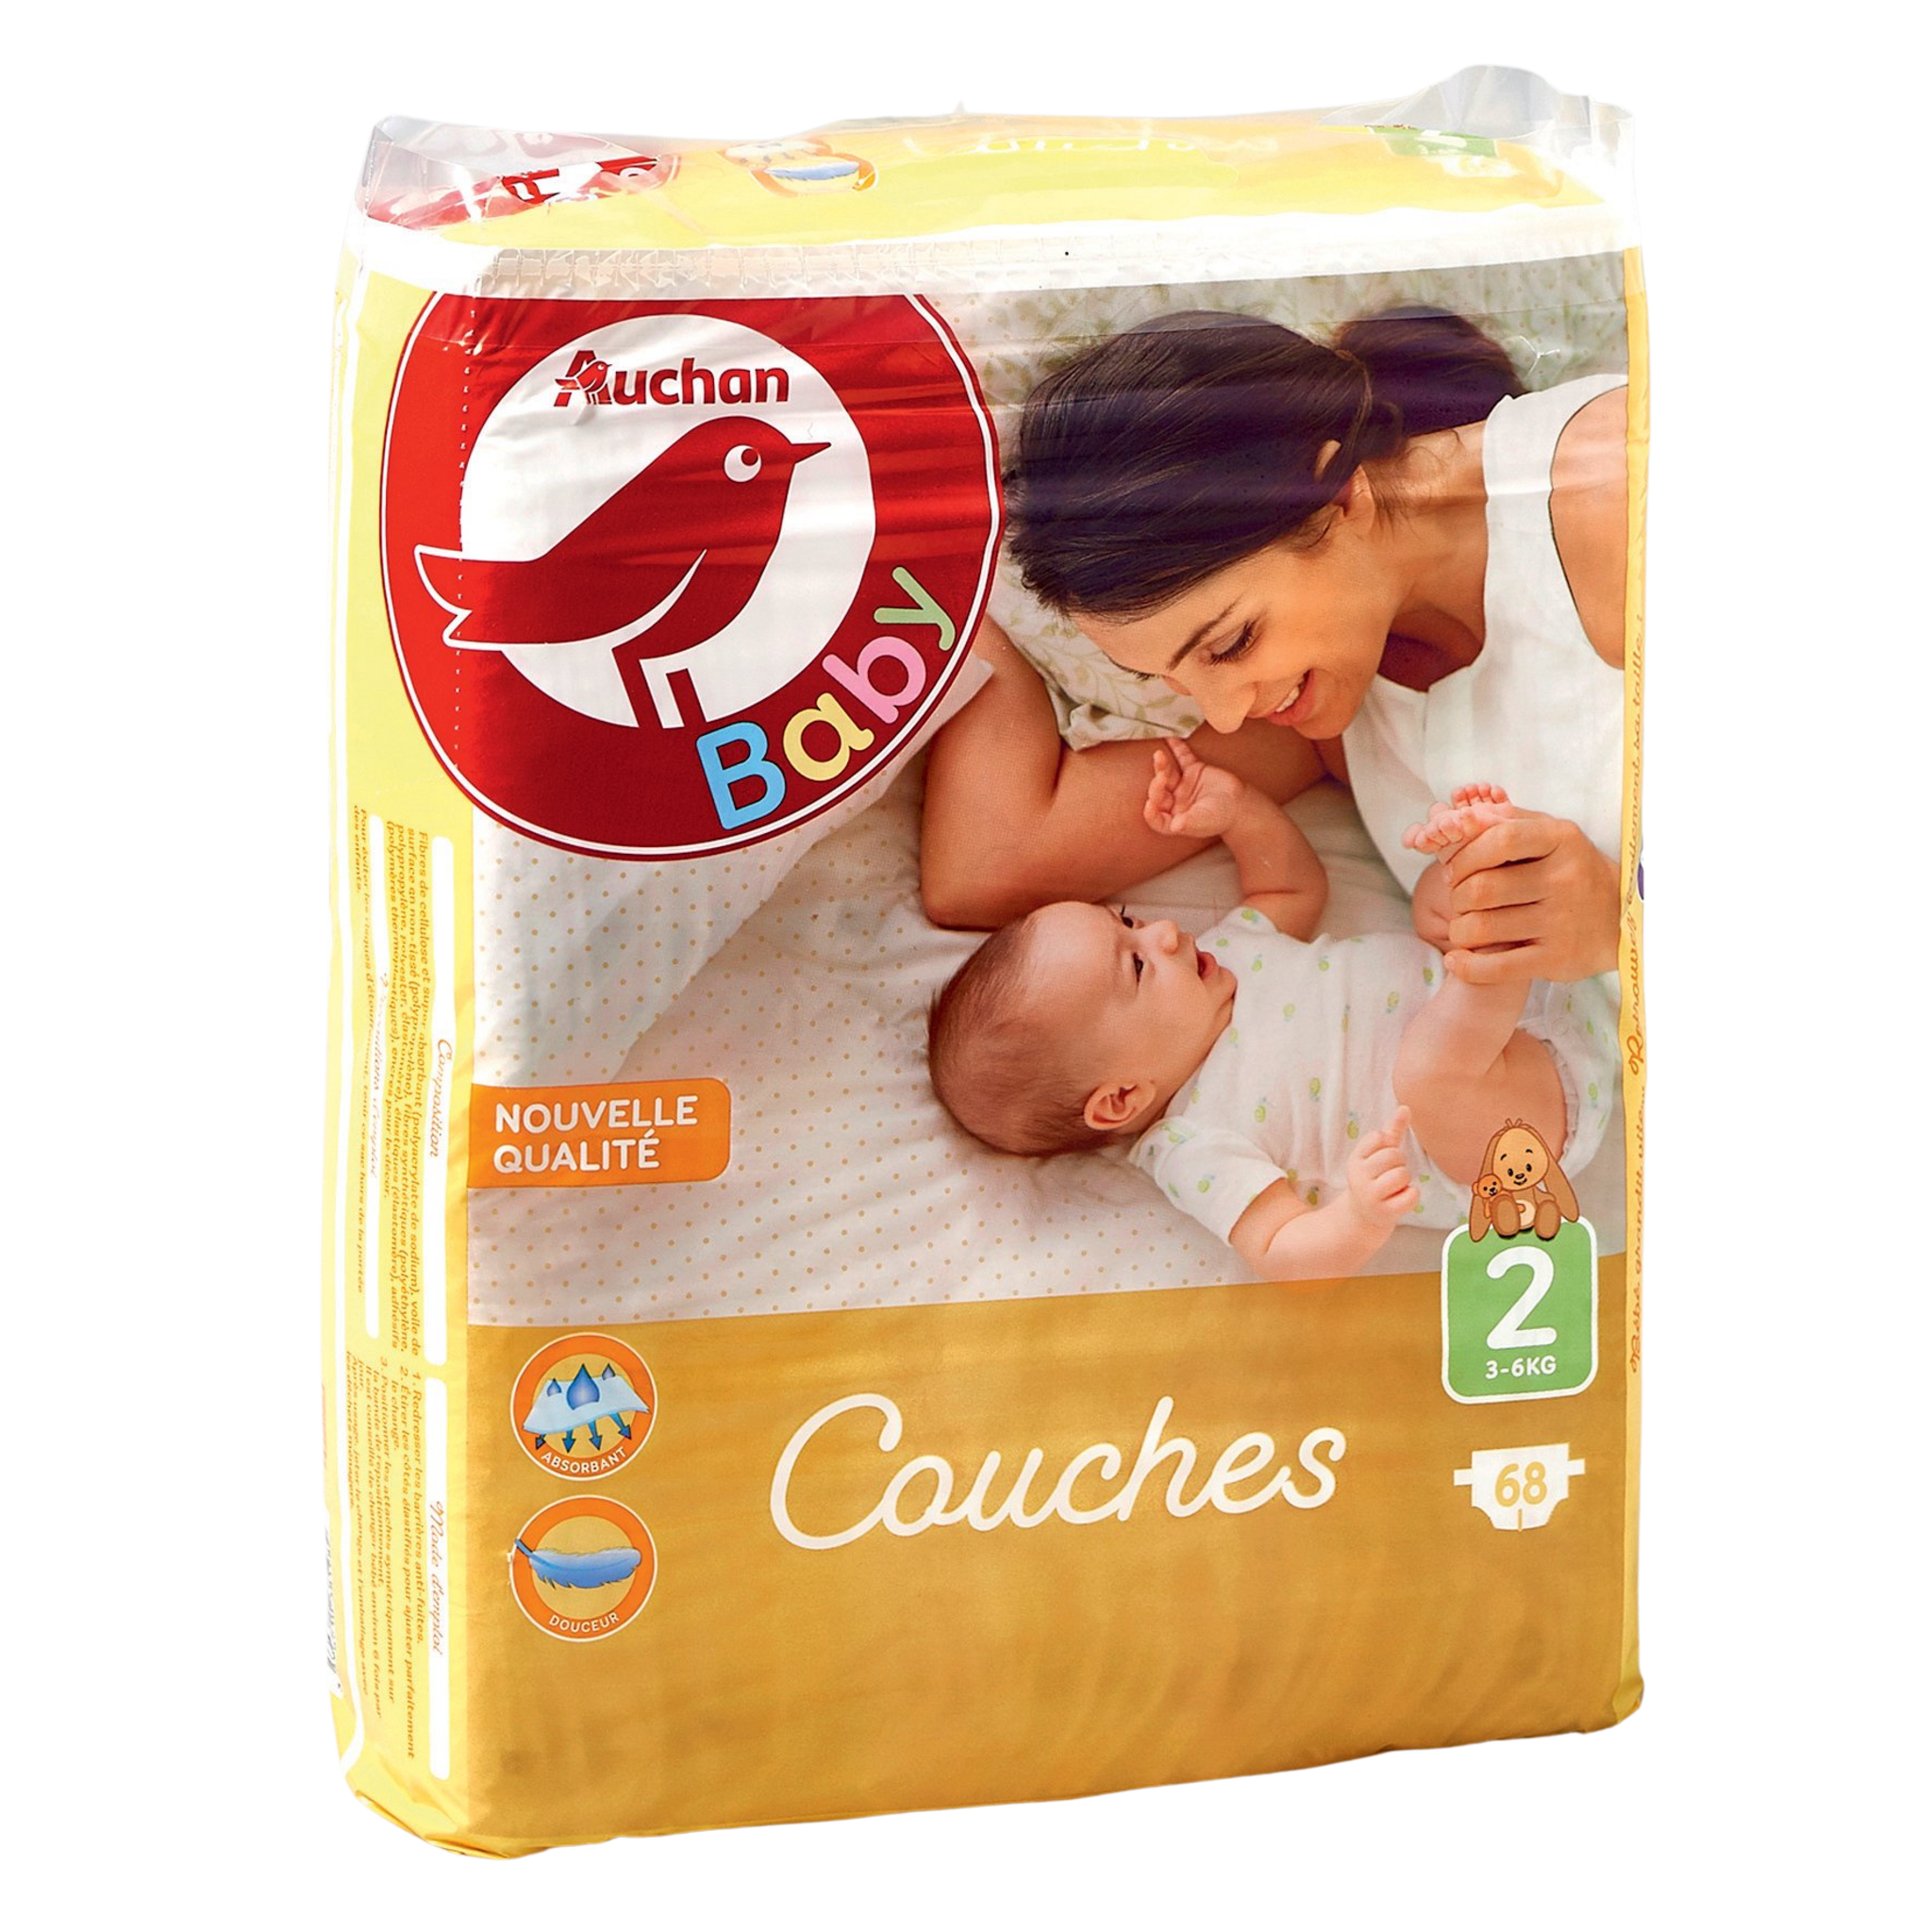 AUCHAN BABY Couches taille 2 (3-6kg) 68 couches pas cher 